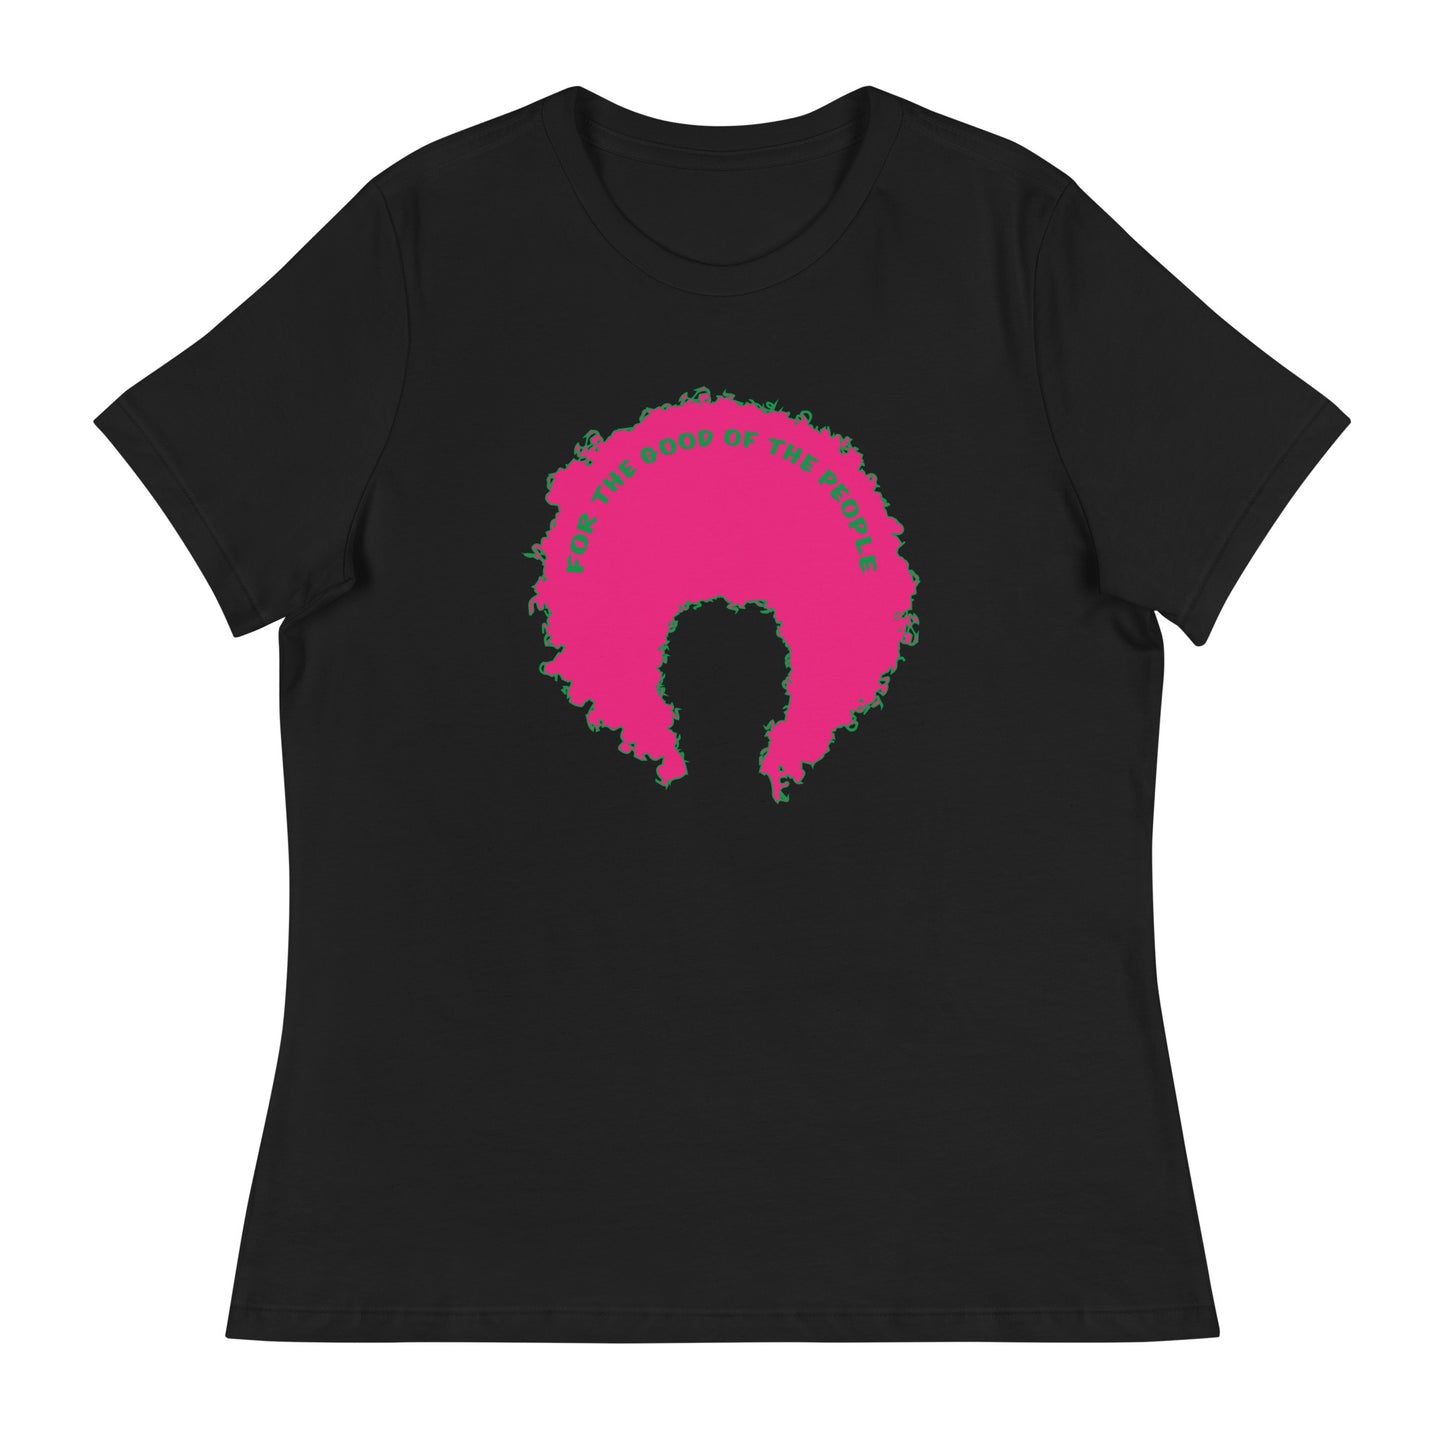 Black women's tee with pink afro graphic trimmed in green with for the good of the people in green on the inside top of the afro.